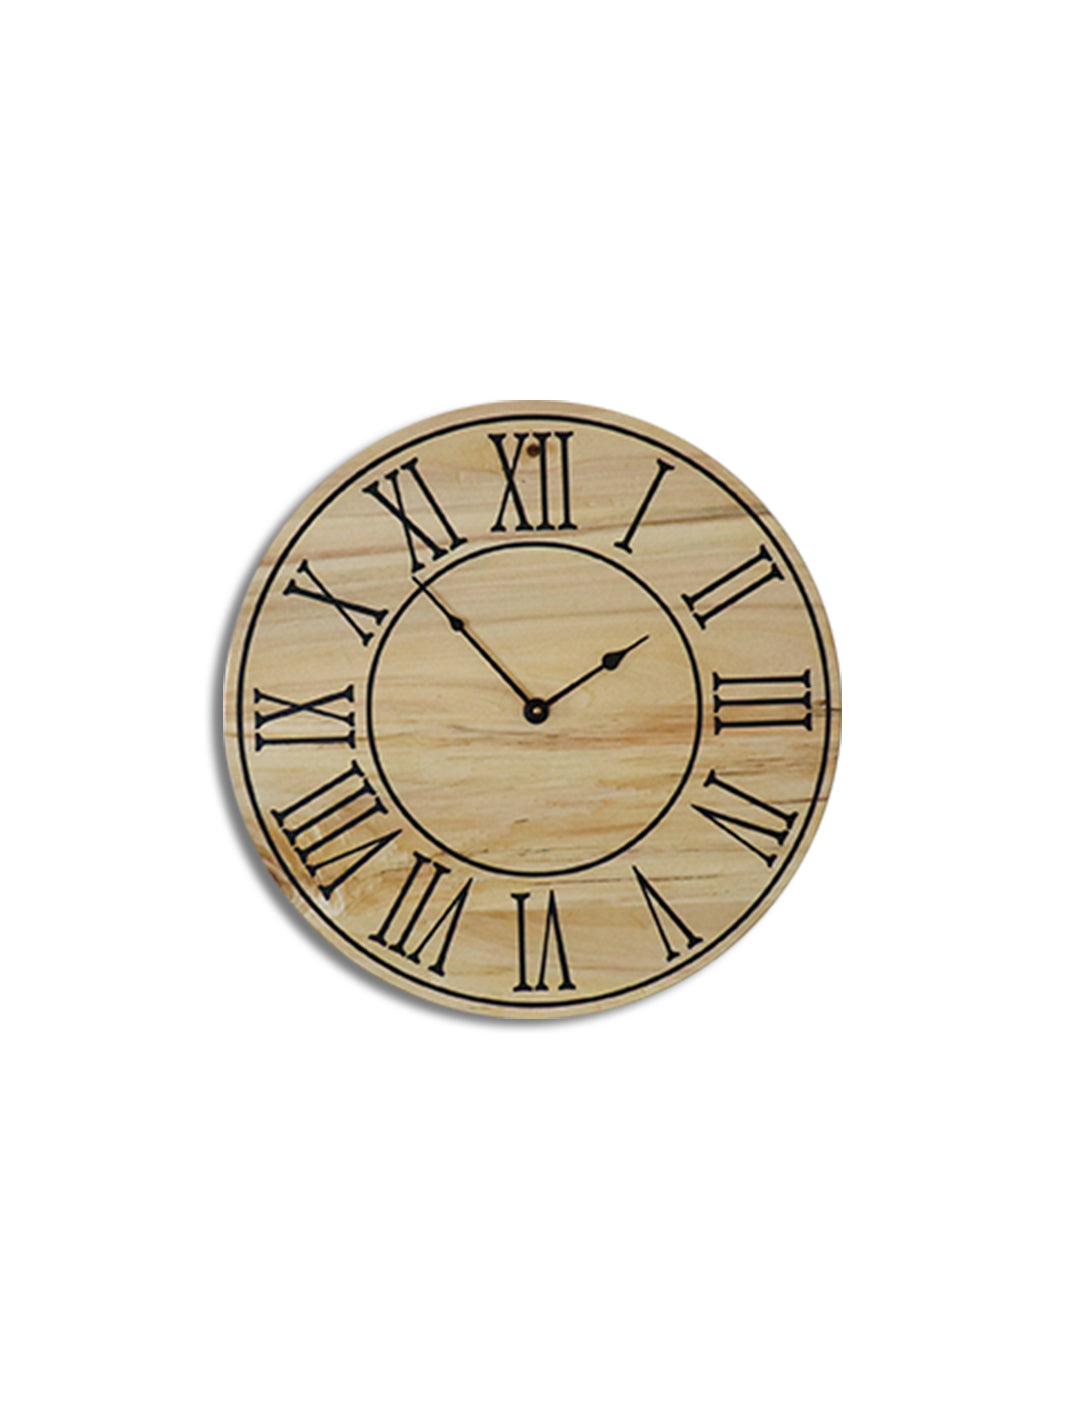 Soft Maple 18" Wood Clock with Black Roman Numerals (in stock) Earthly Comfort Clocks 1681